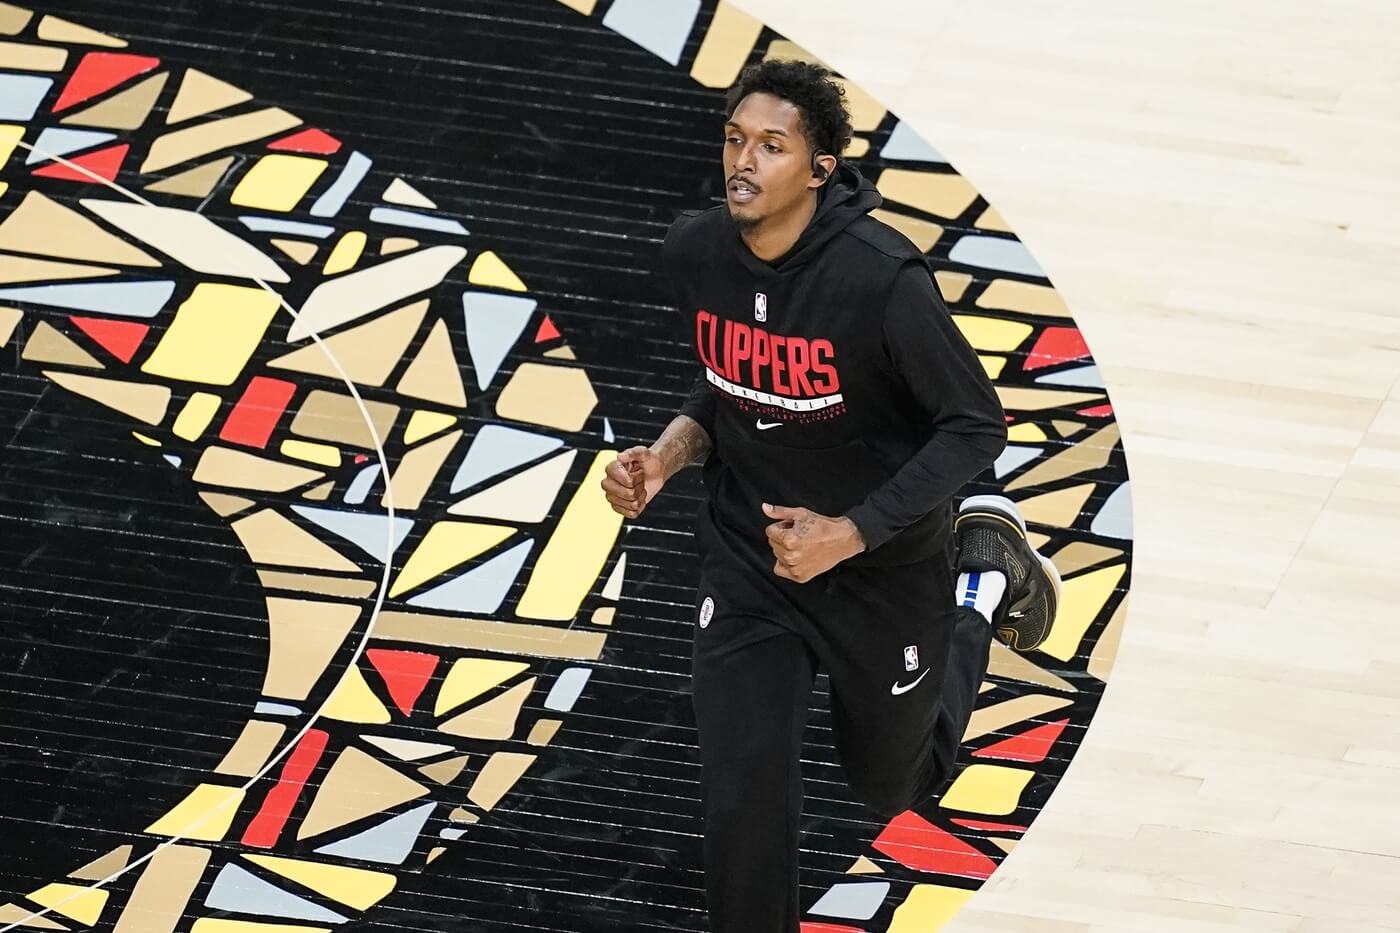 Jan 26, 2021; Atlanta, Georgia, USA; LA Clippers guard Lou Williams (23) warms up on the court prior to the game against the Atlanta Hawks at State Farm Arena. Mandatory Credit: Dale Zanine-USA TODAY Sports